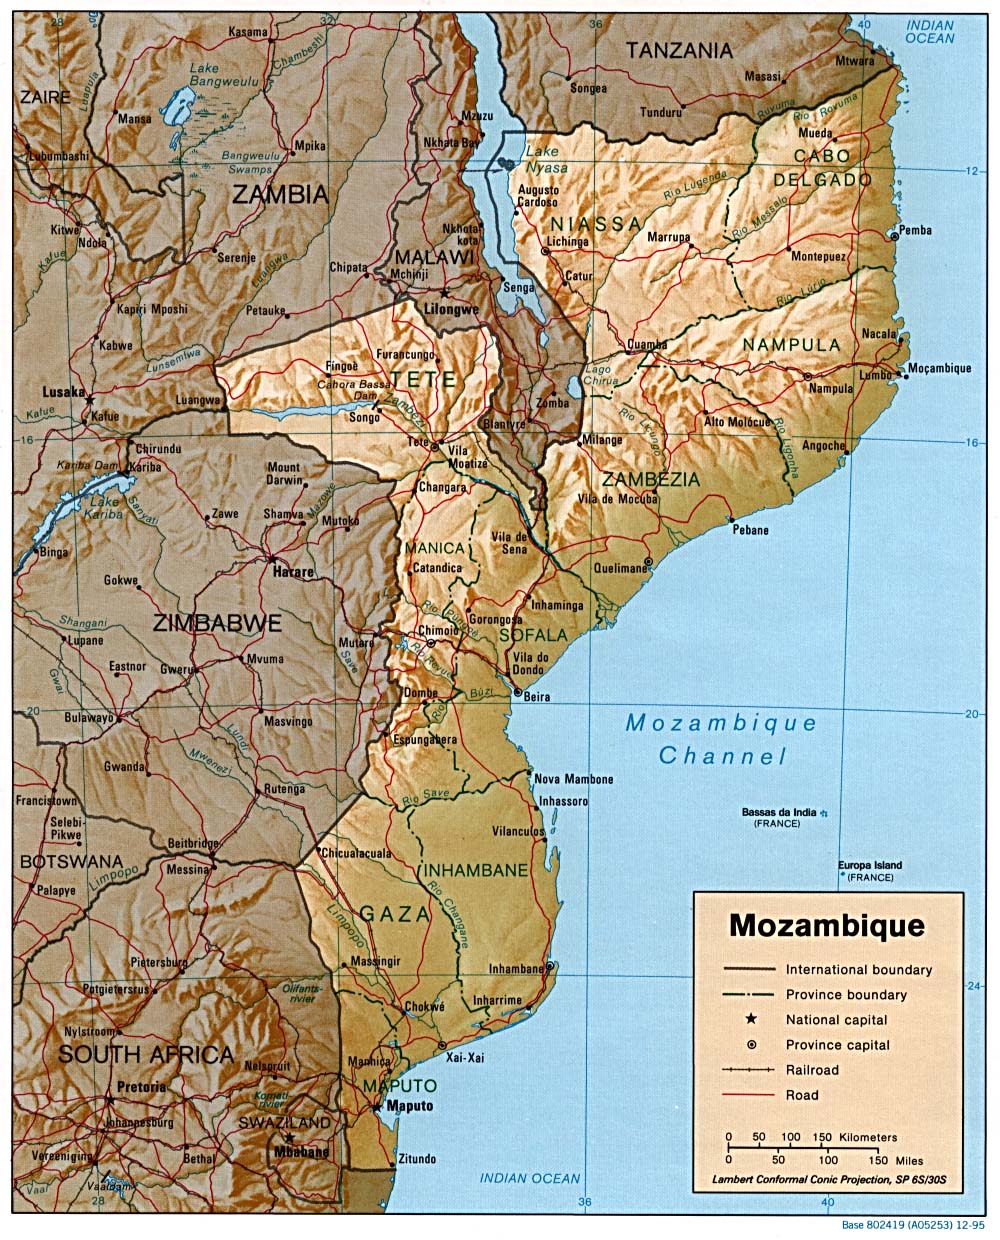 MOZAMBIQUE Maps - Perry-Castañeda Map Collection - UT Library Online